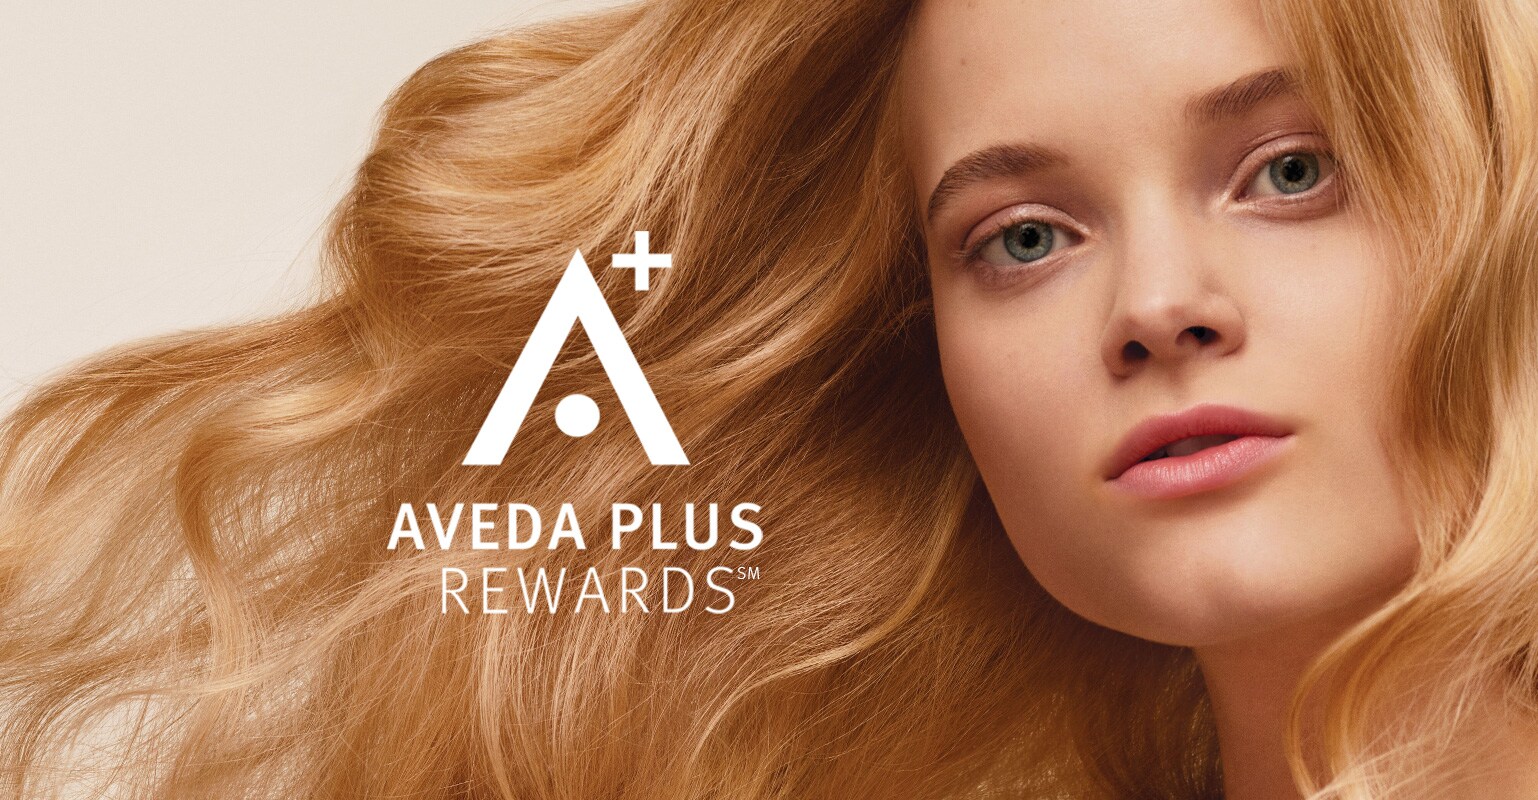 Aveda Loyalty Members receive free shipping with your order